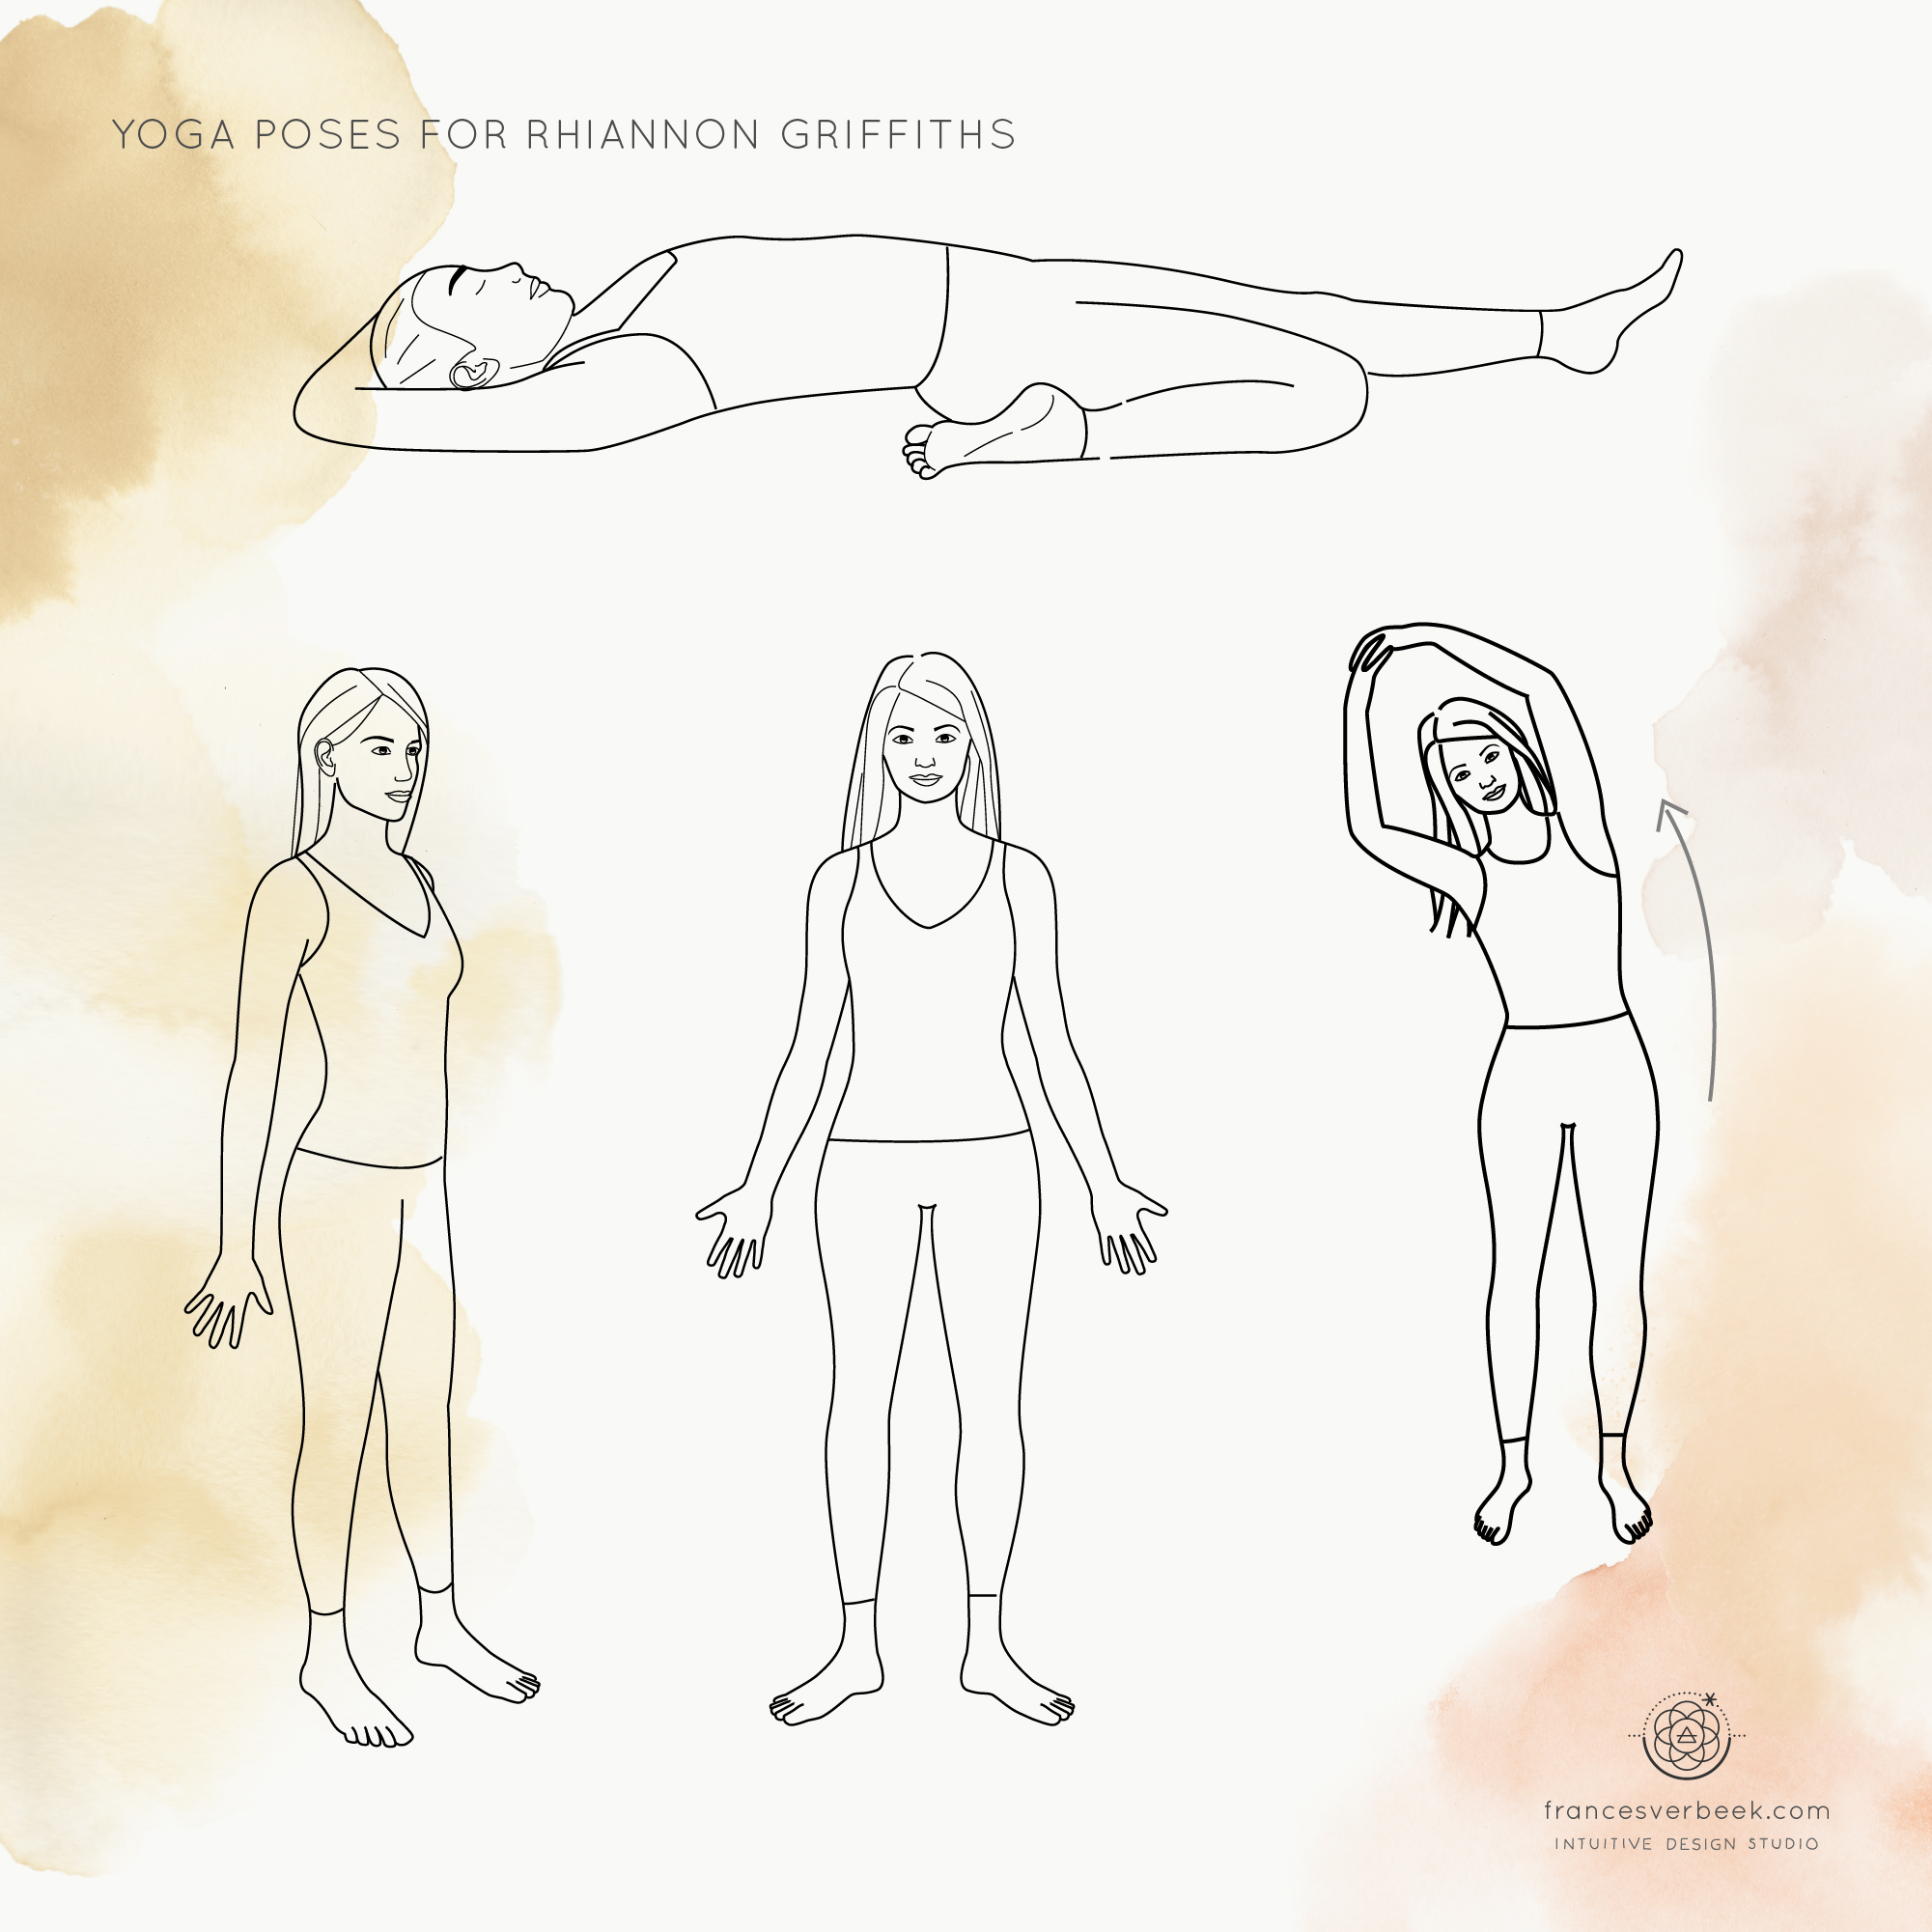 Yoga poses illustration for Rhiannon Griffiths by Frances Verbeek